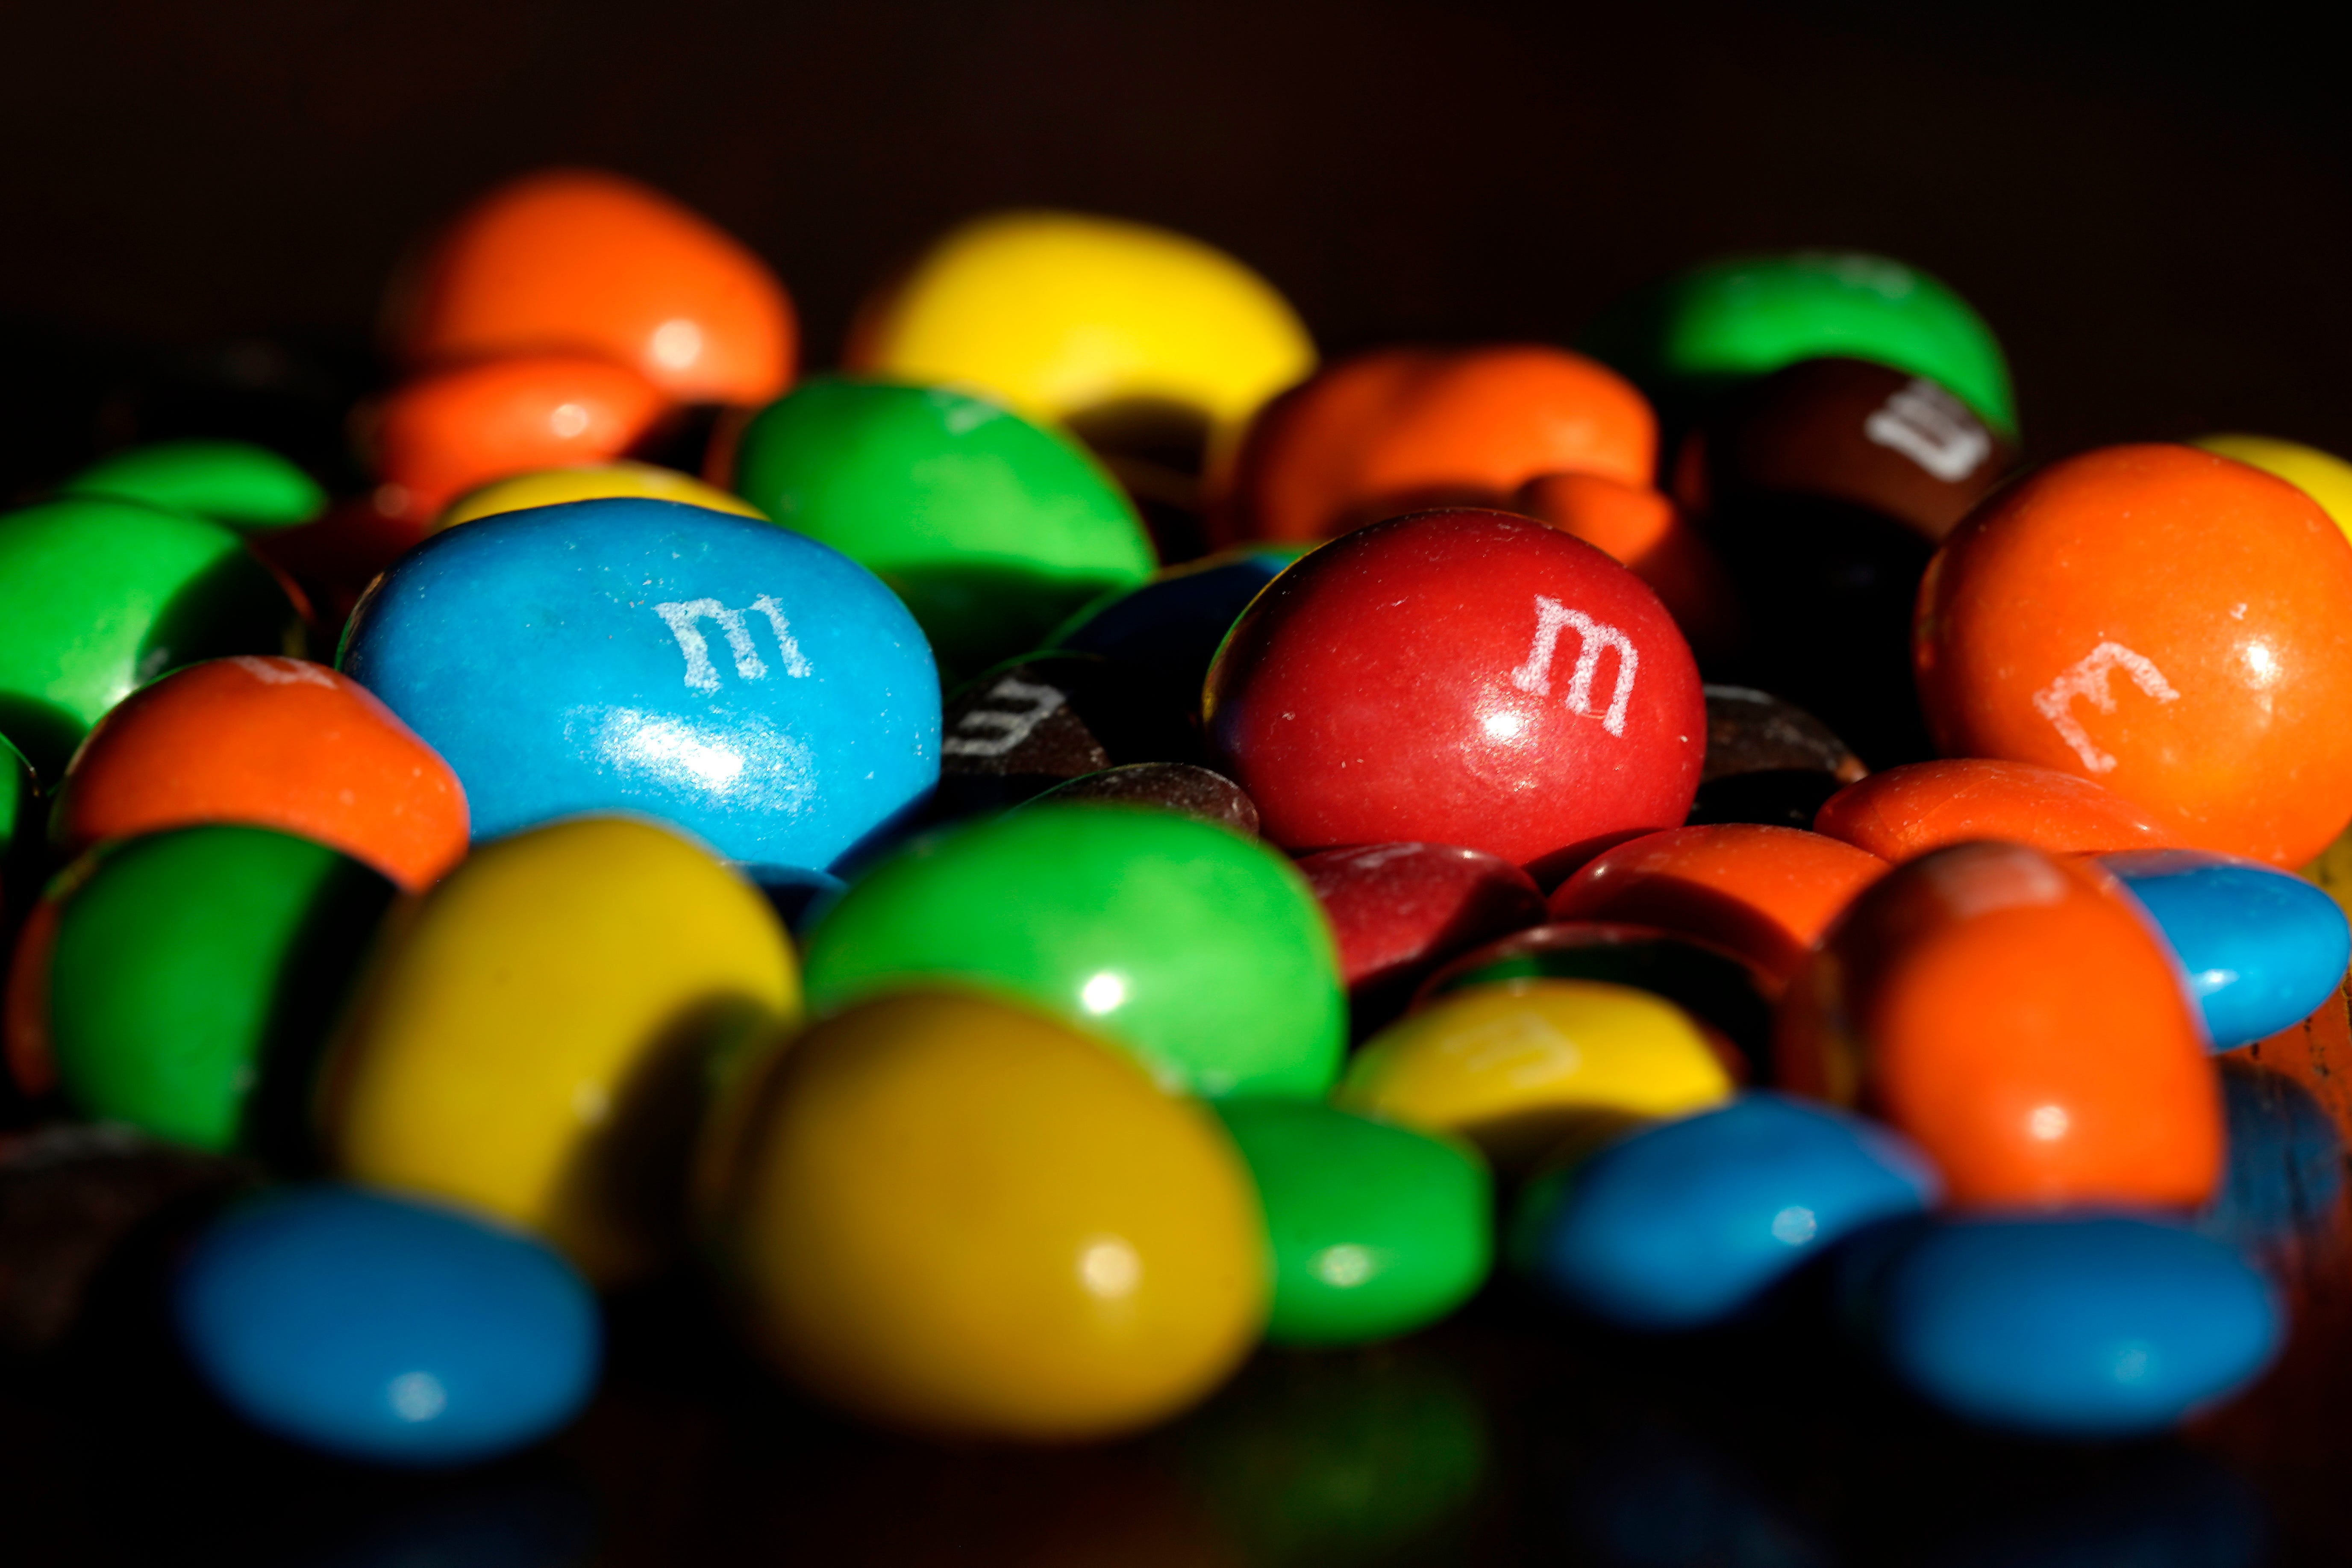 M&M's says it will replace iconic 'spokescandies' mascots with Maya Rudolph after backlash